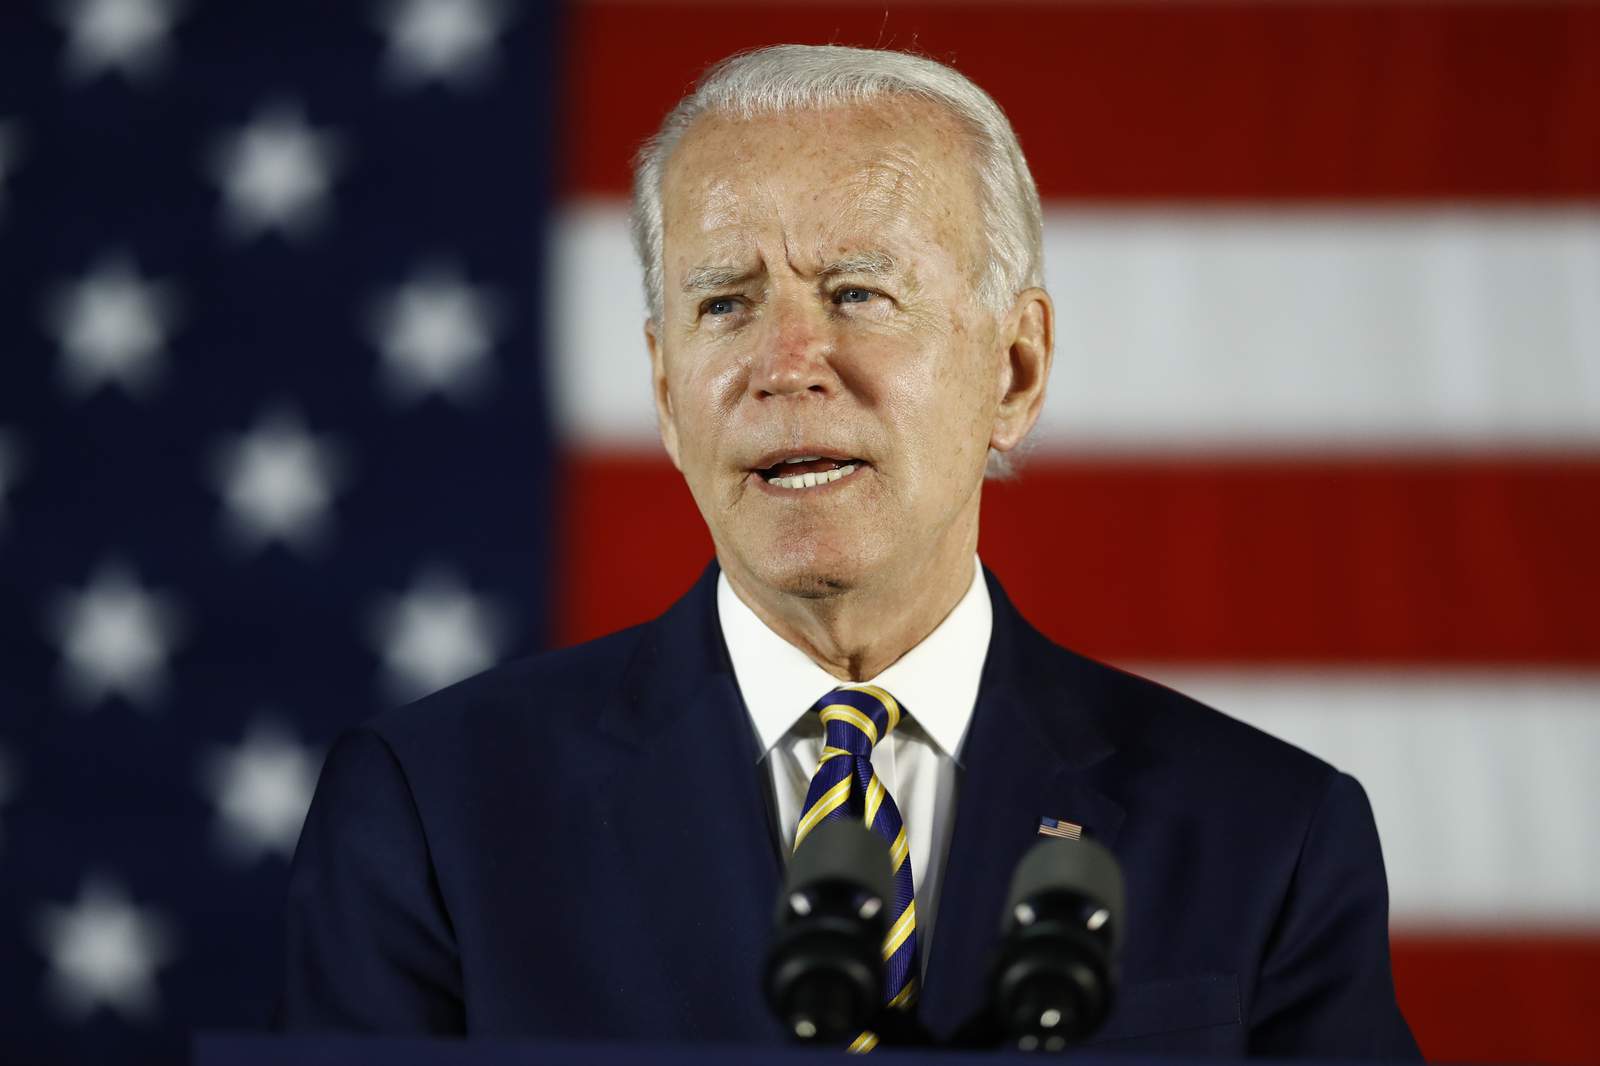 Biden slams Trump over reported bounties placed on US troops